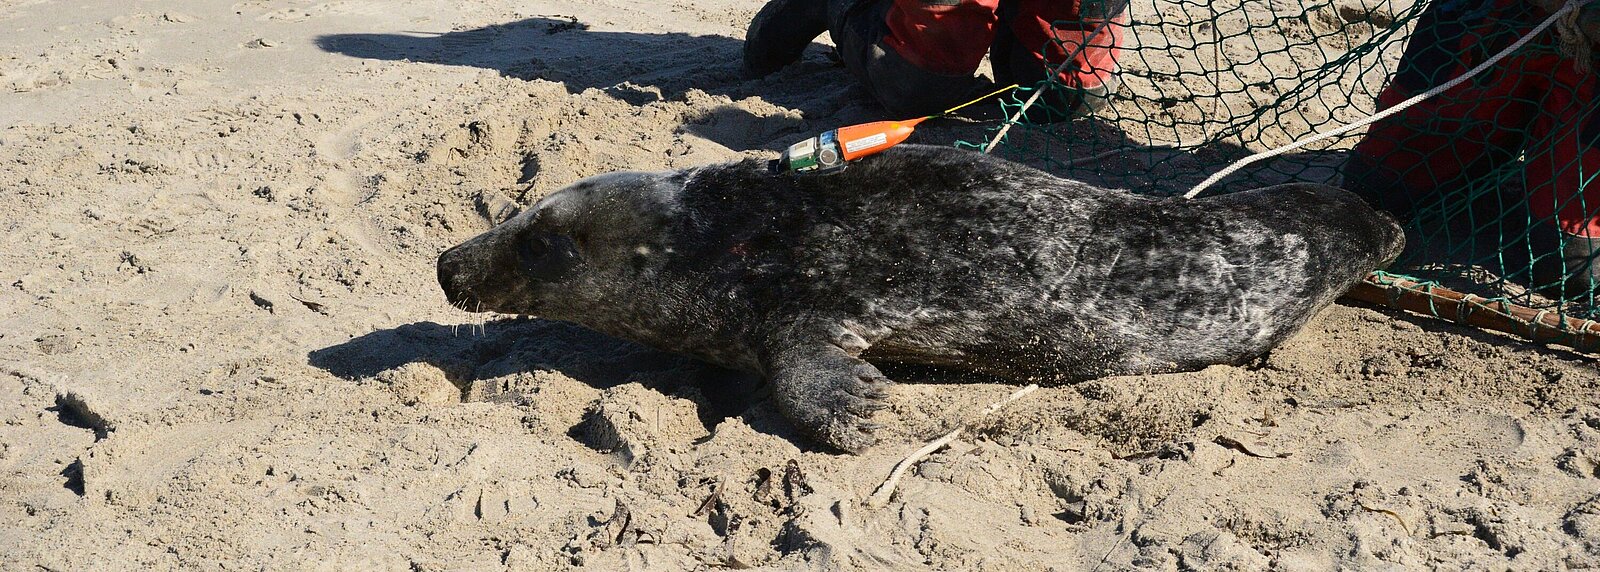 Grey seal with tag, Heligoland dune